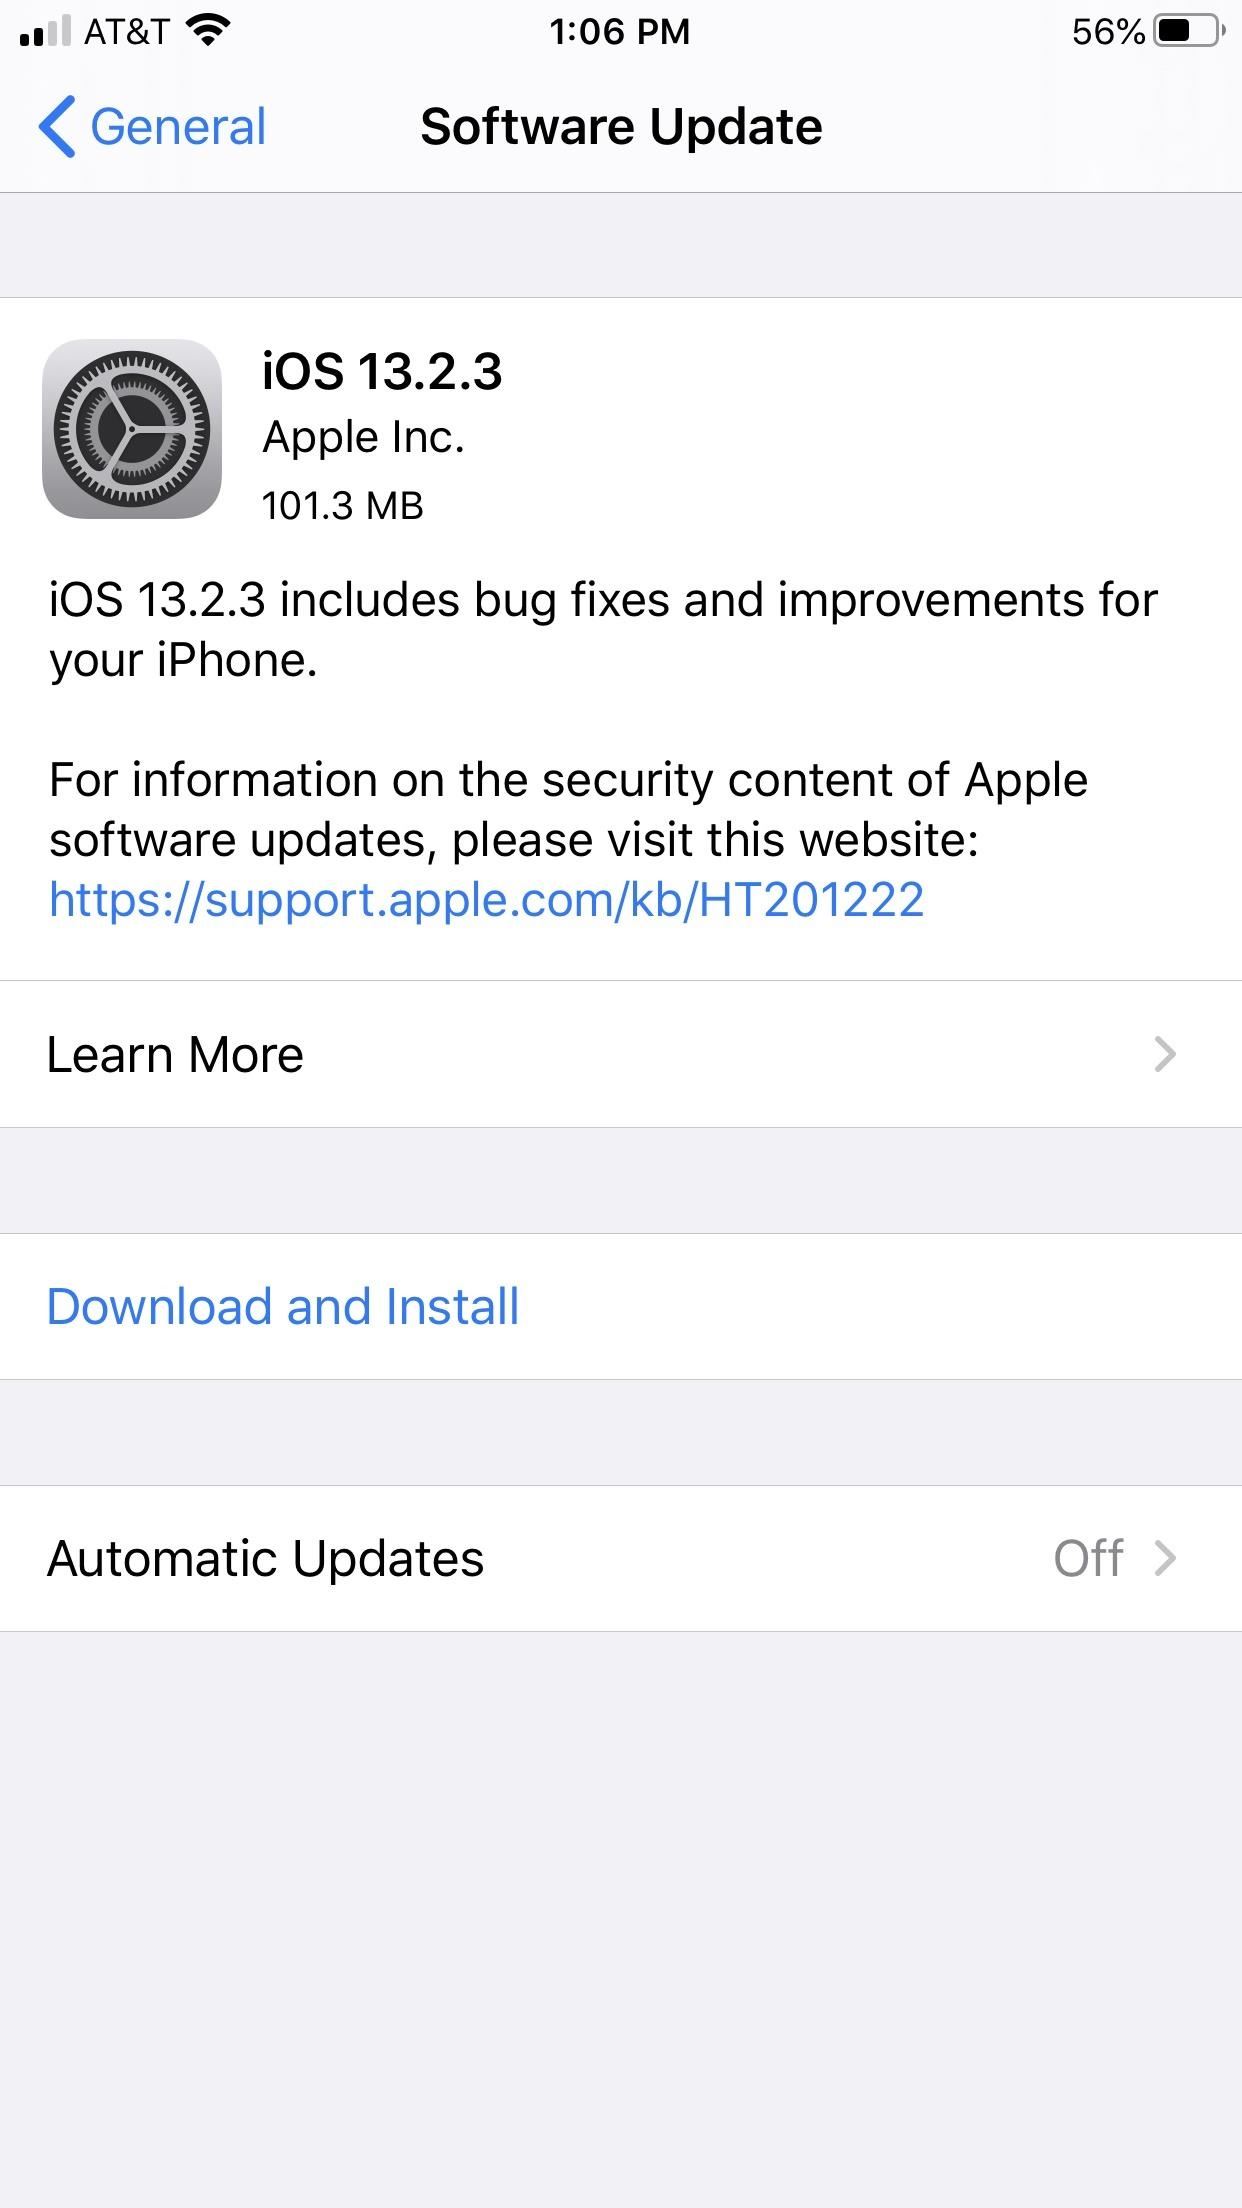 Apple Just Released iOS 13.2.3, Includes Fixes for Mail, Messages, Search & Other Bugs